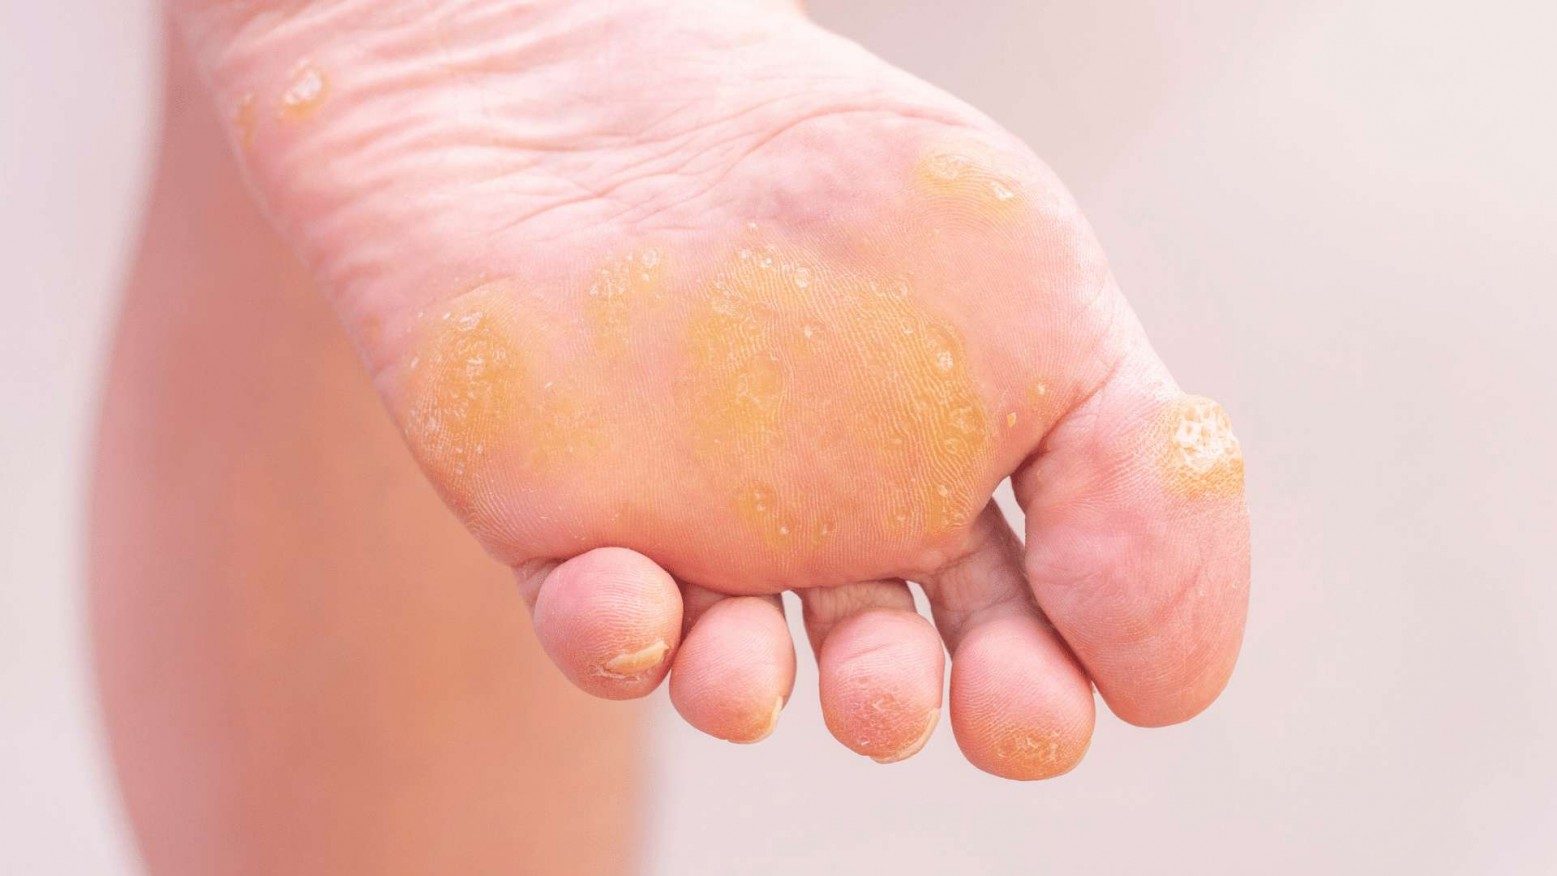 The bottom of a foot covered in calluses and corns.